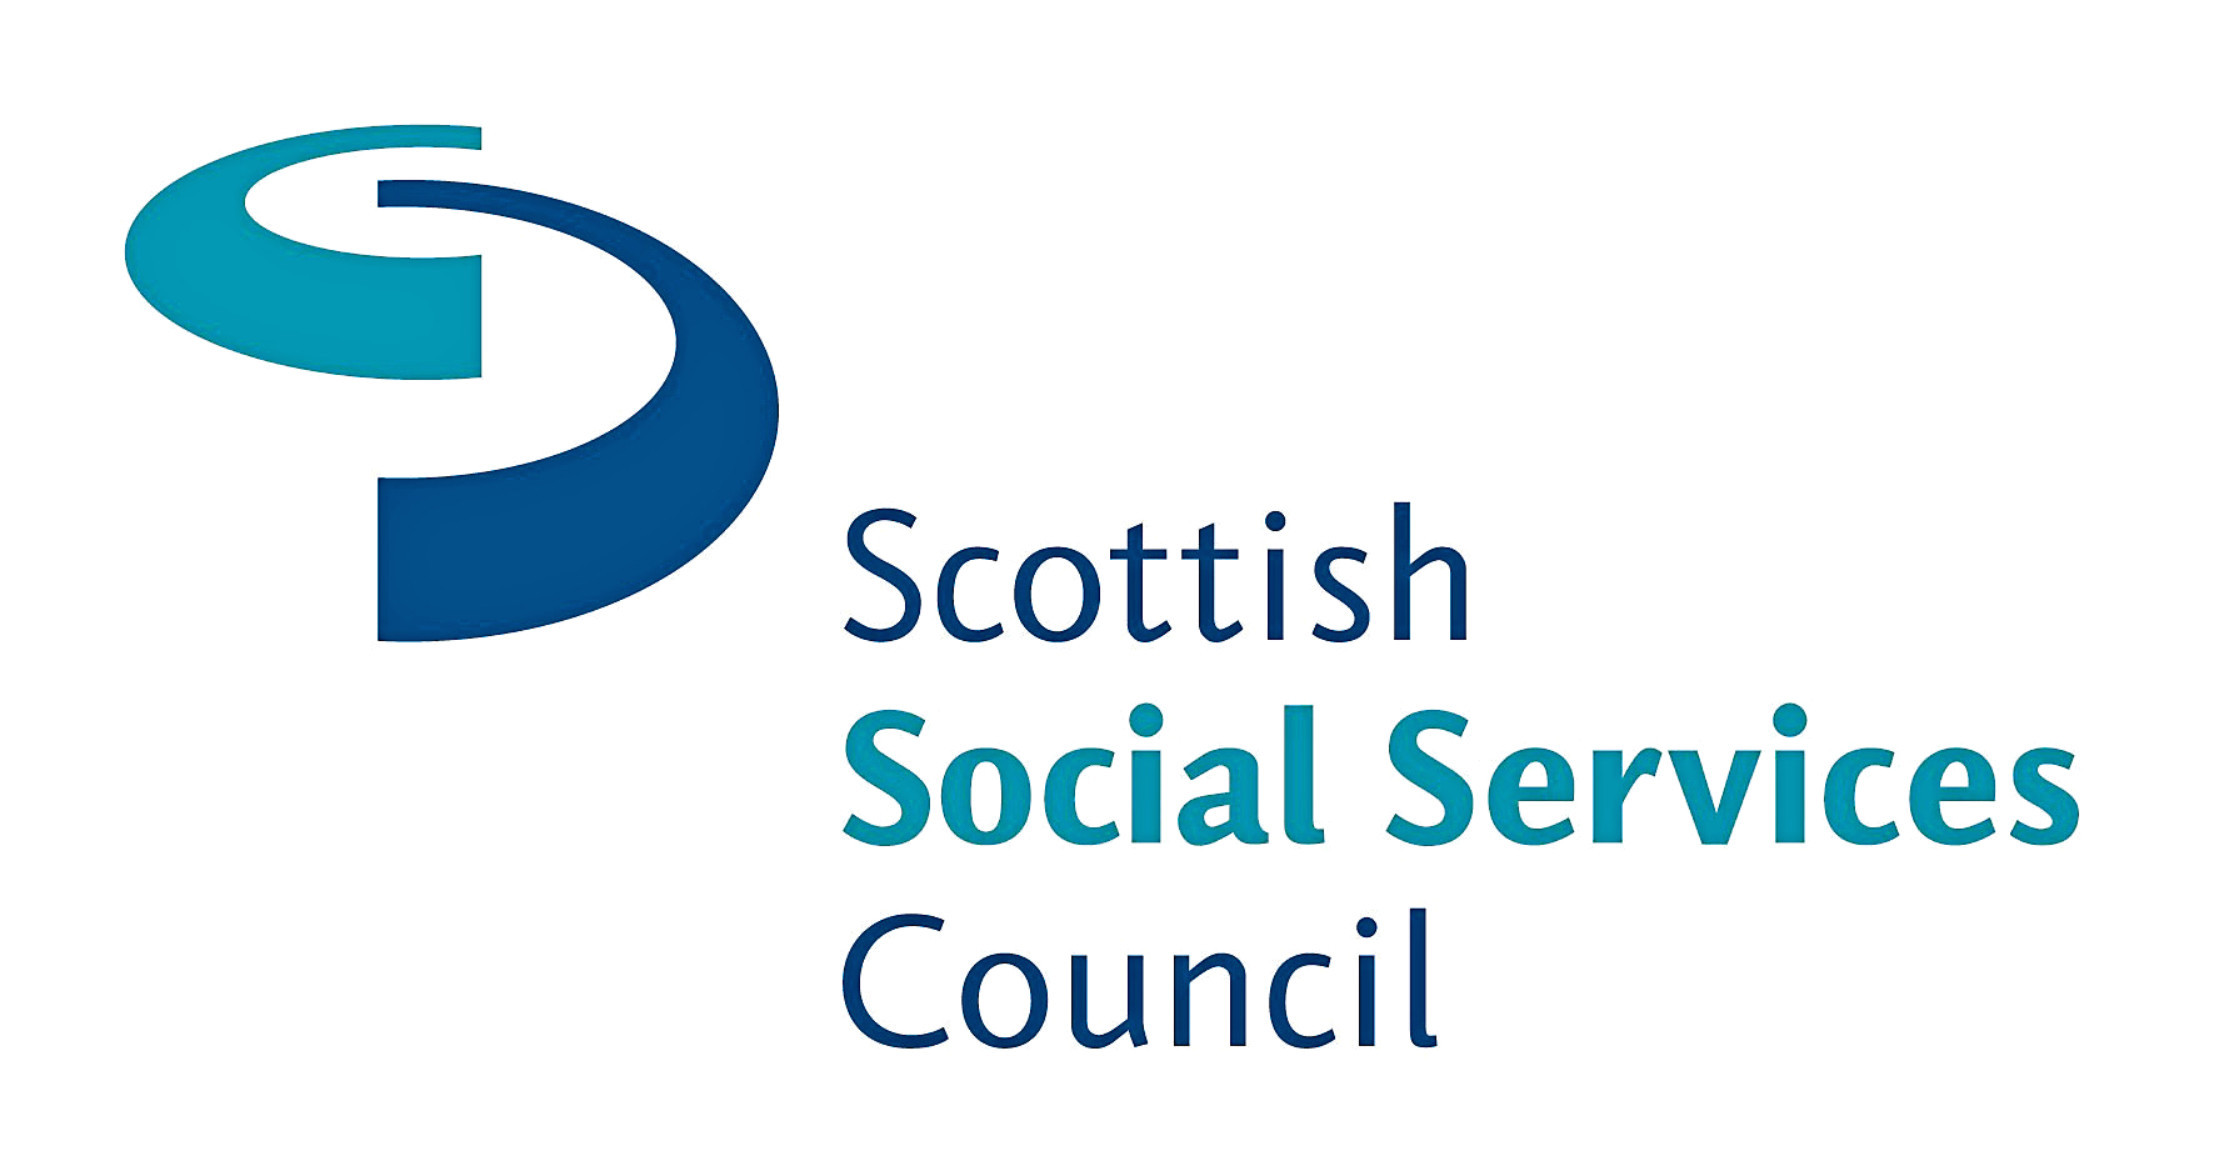 The decision to impose a warning was made by the Scottish Social Services Council.